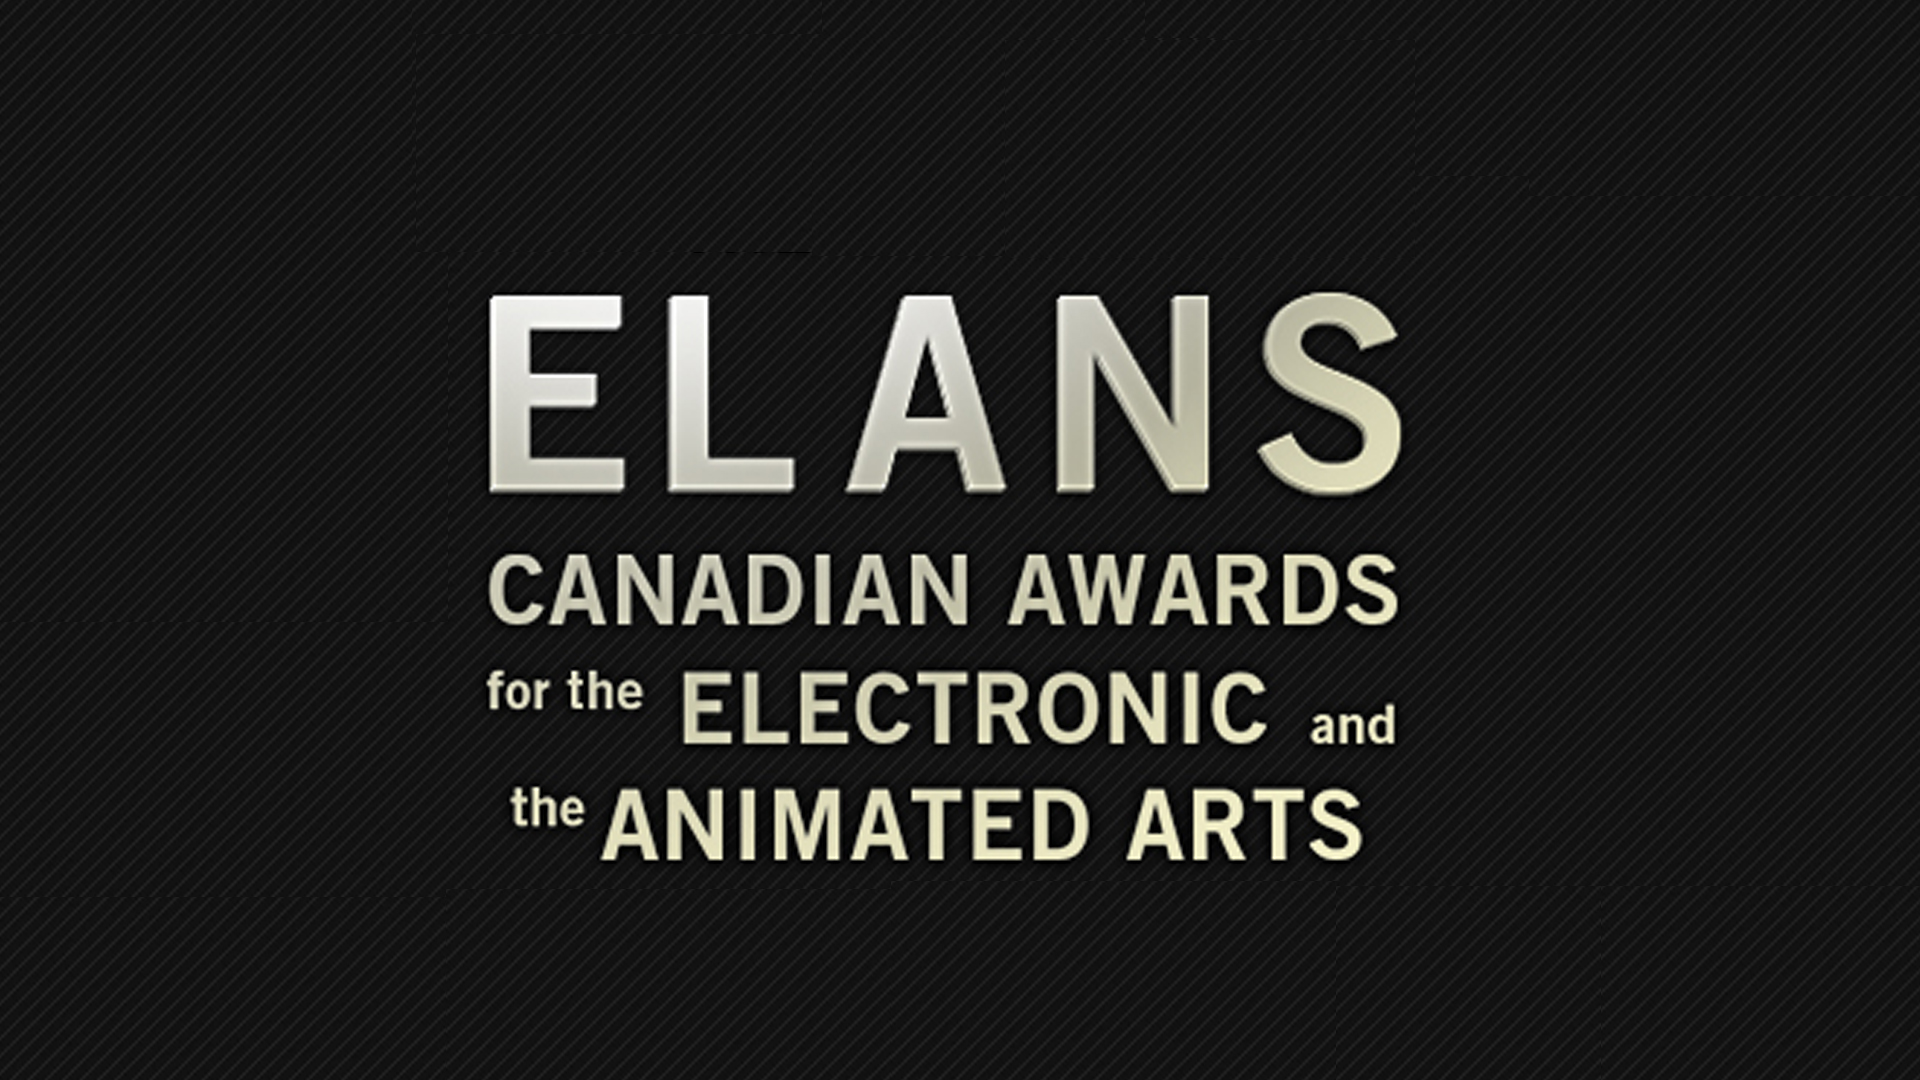 Canadian Awards for the Animated and Electronic Arts